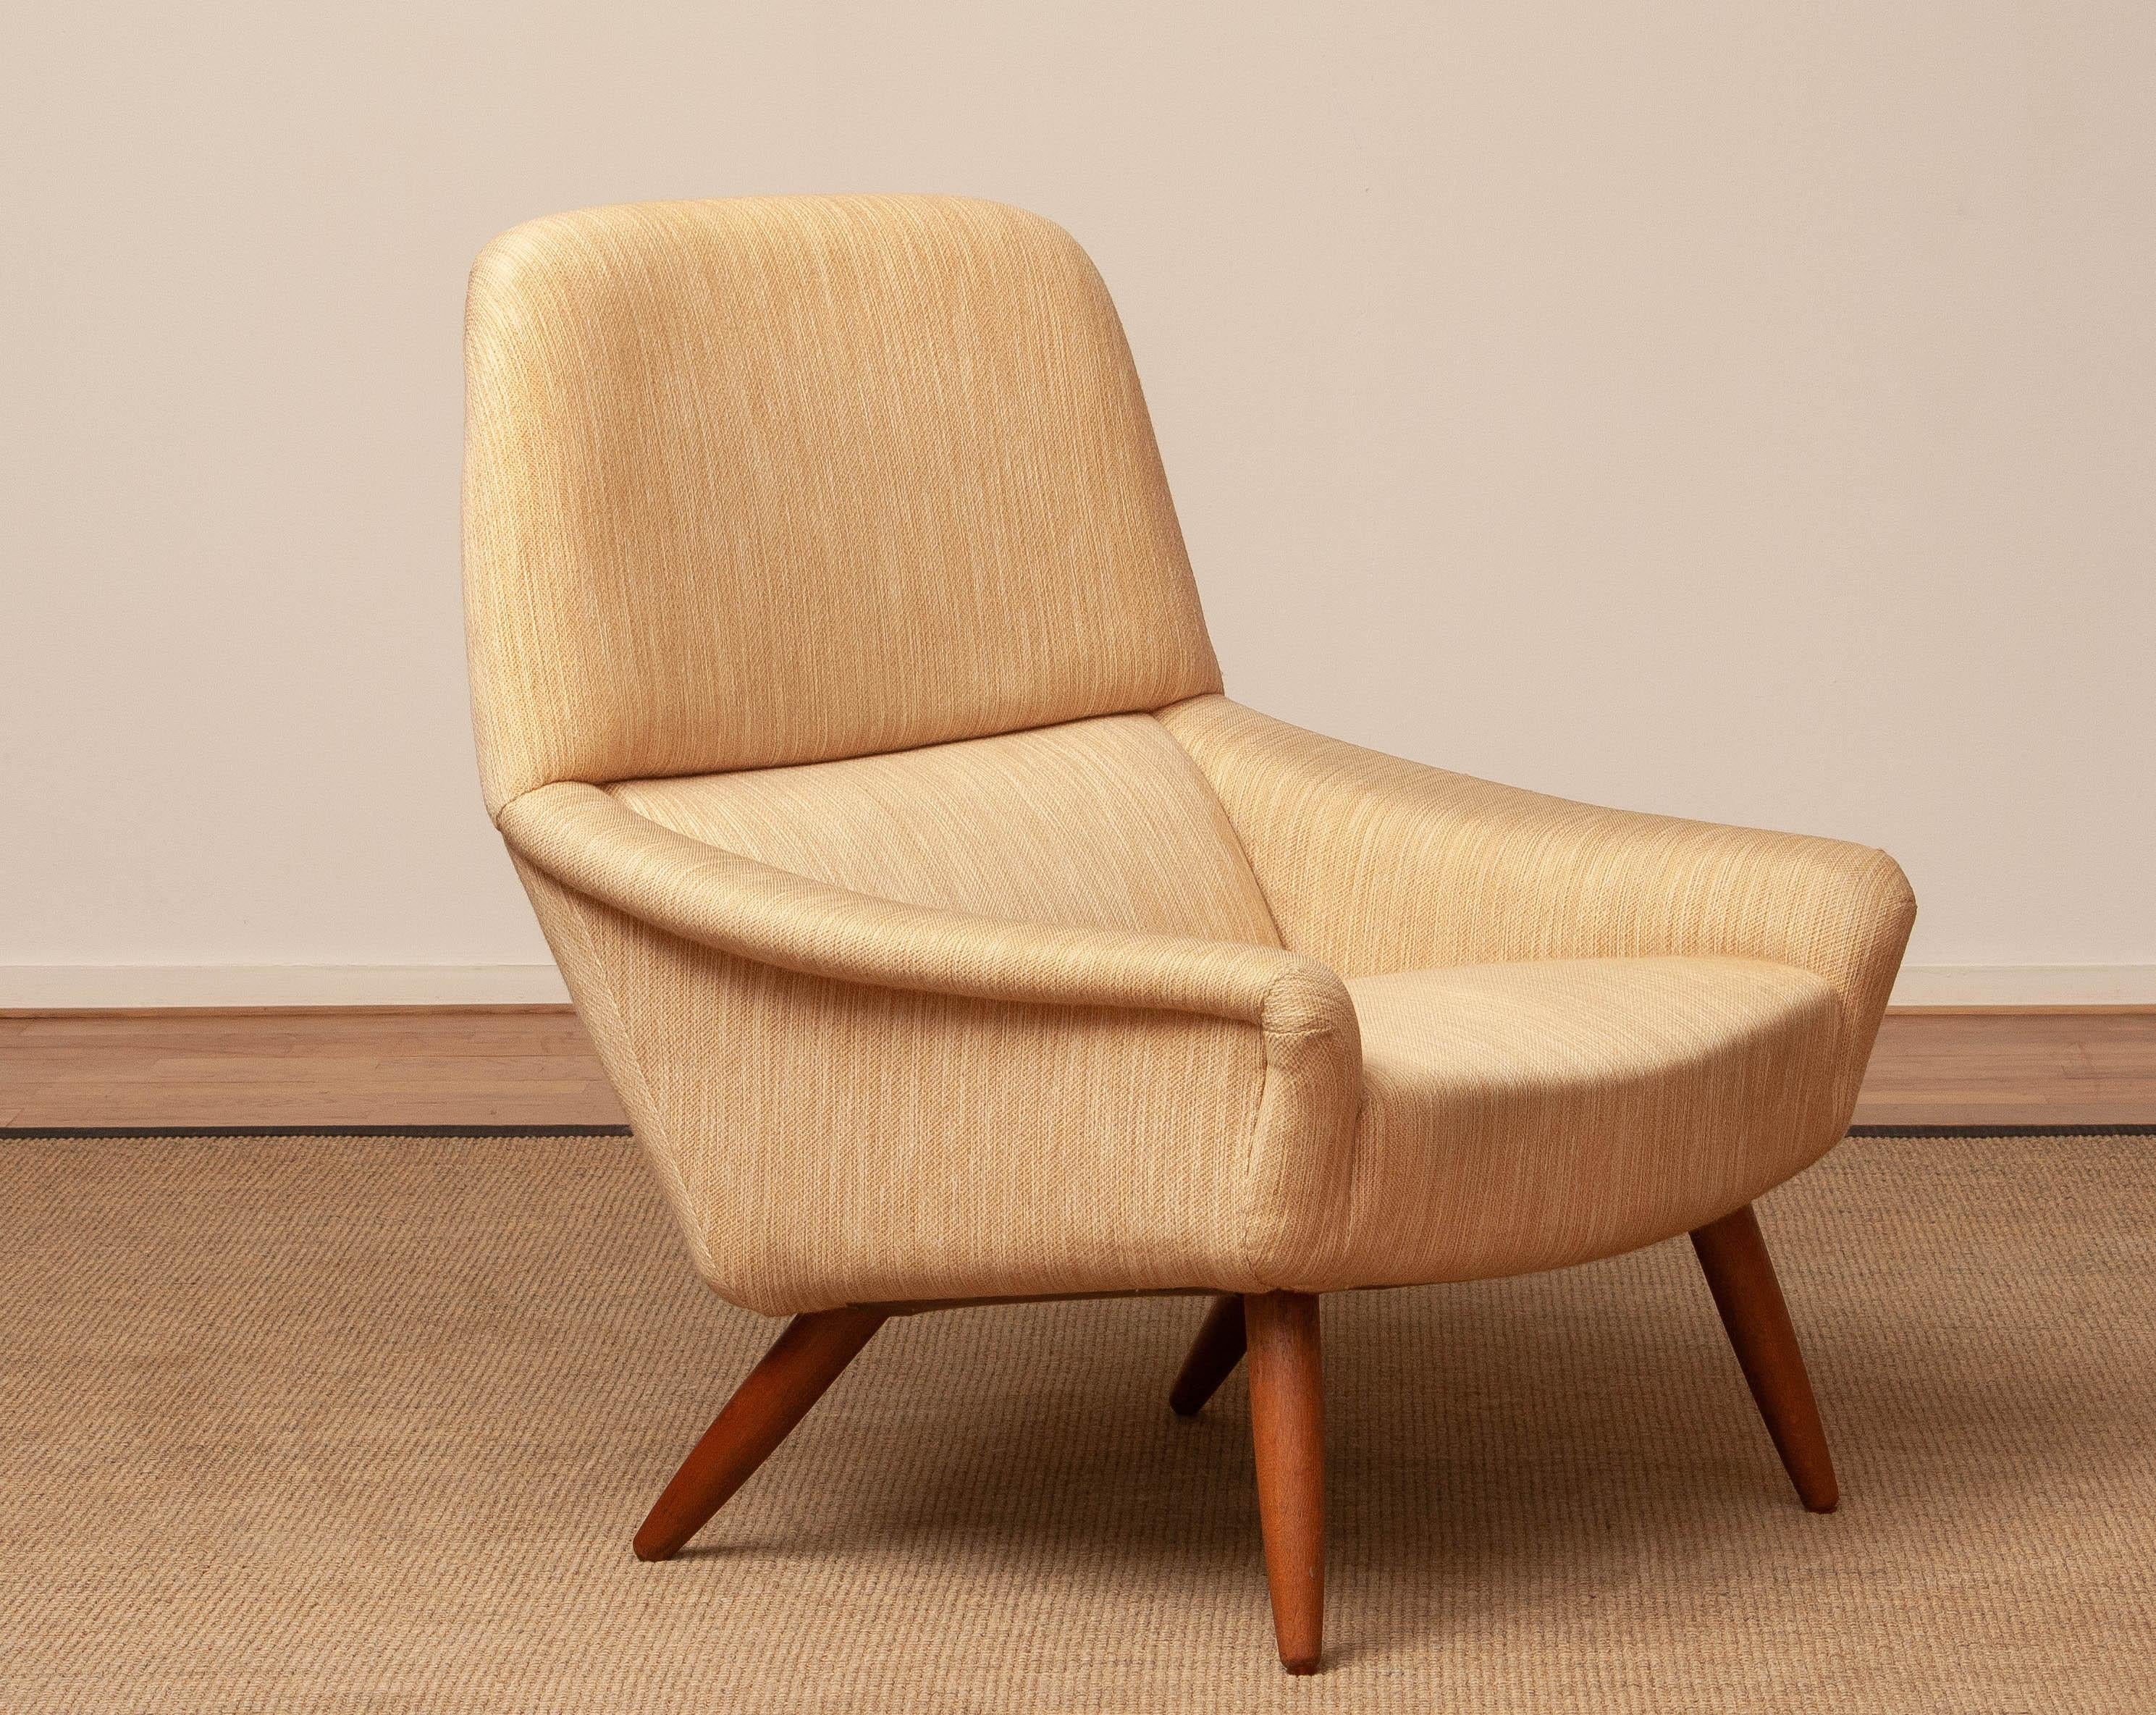 Mid-20th Century 1960s Natural High Back Lounge Chair by Leif Hansen for Kronen in Denmark For Sale